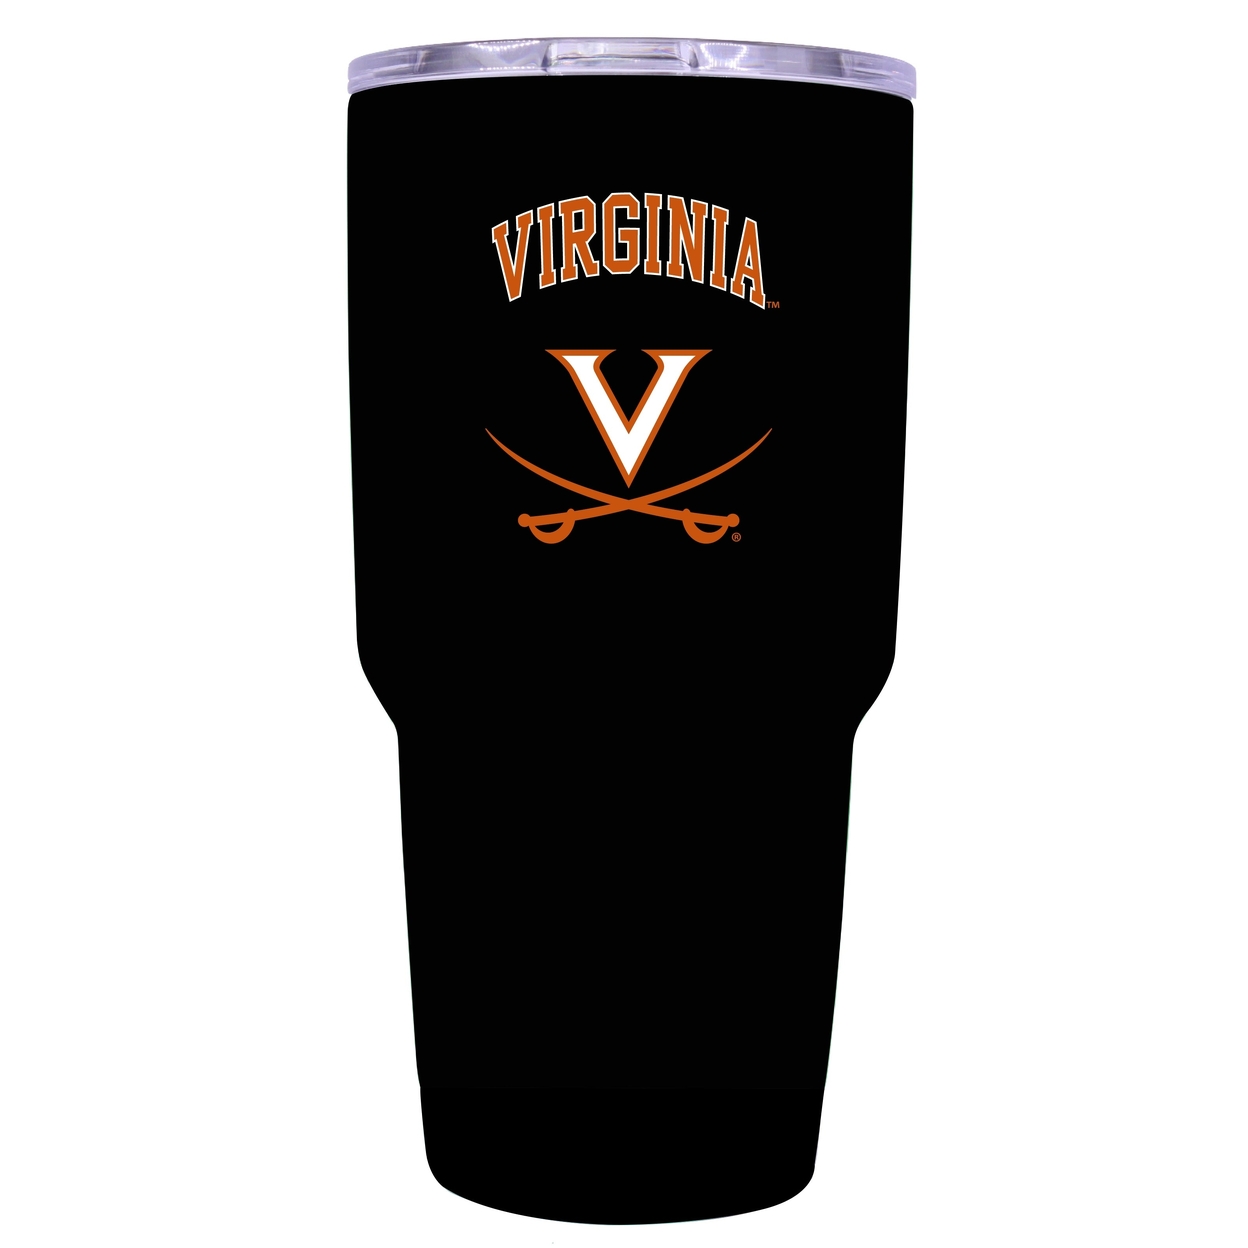 Valparaiso University 24 Oz Choose Your Color Insulated Stainless Steel Tumbler Colorless - Black